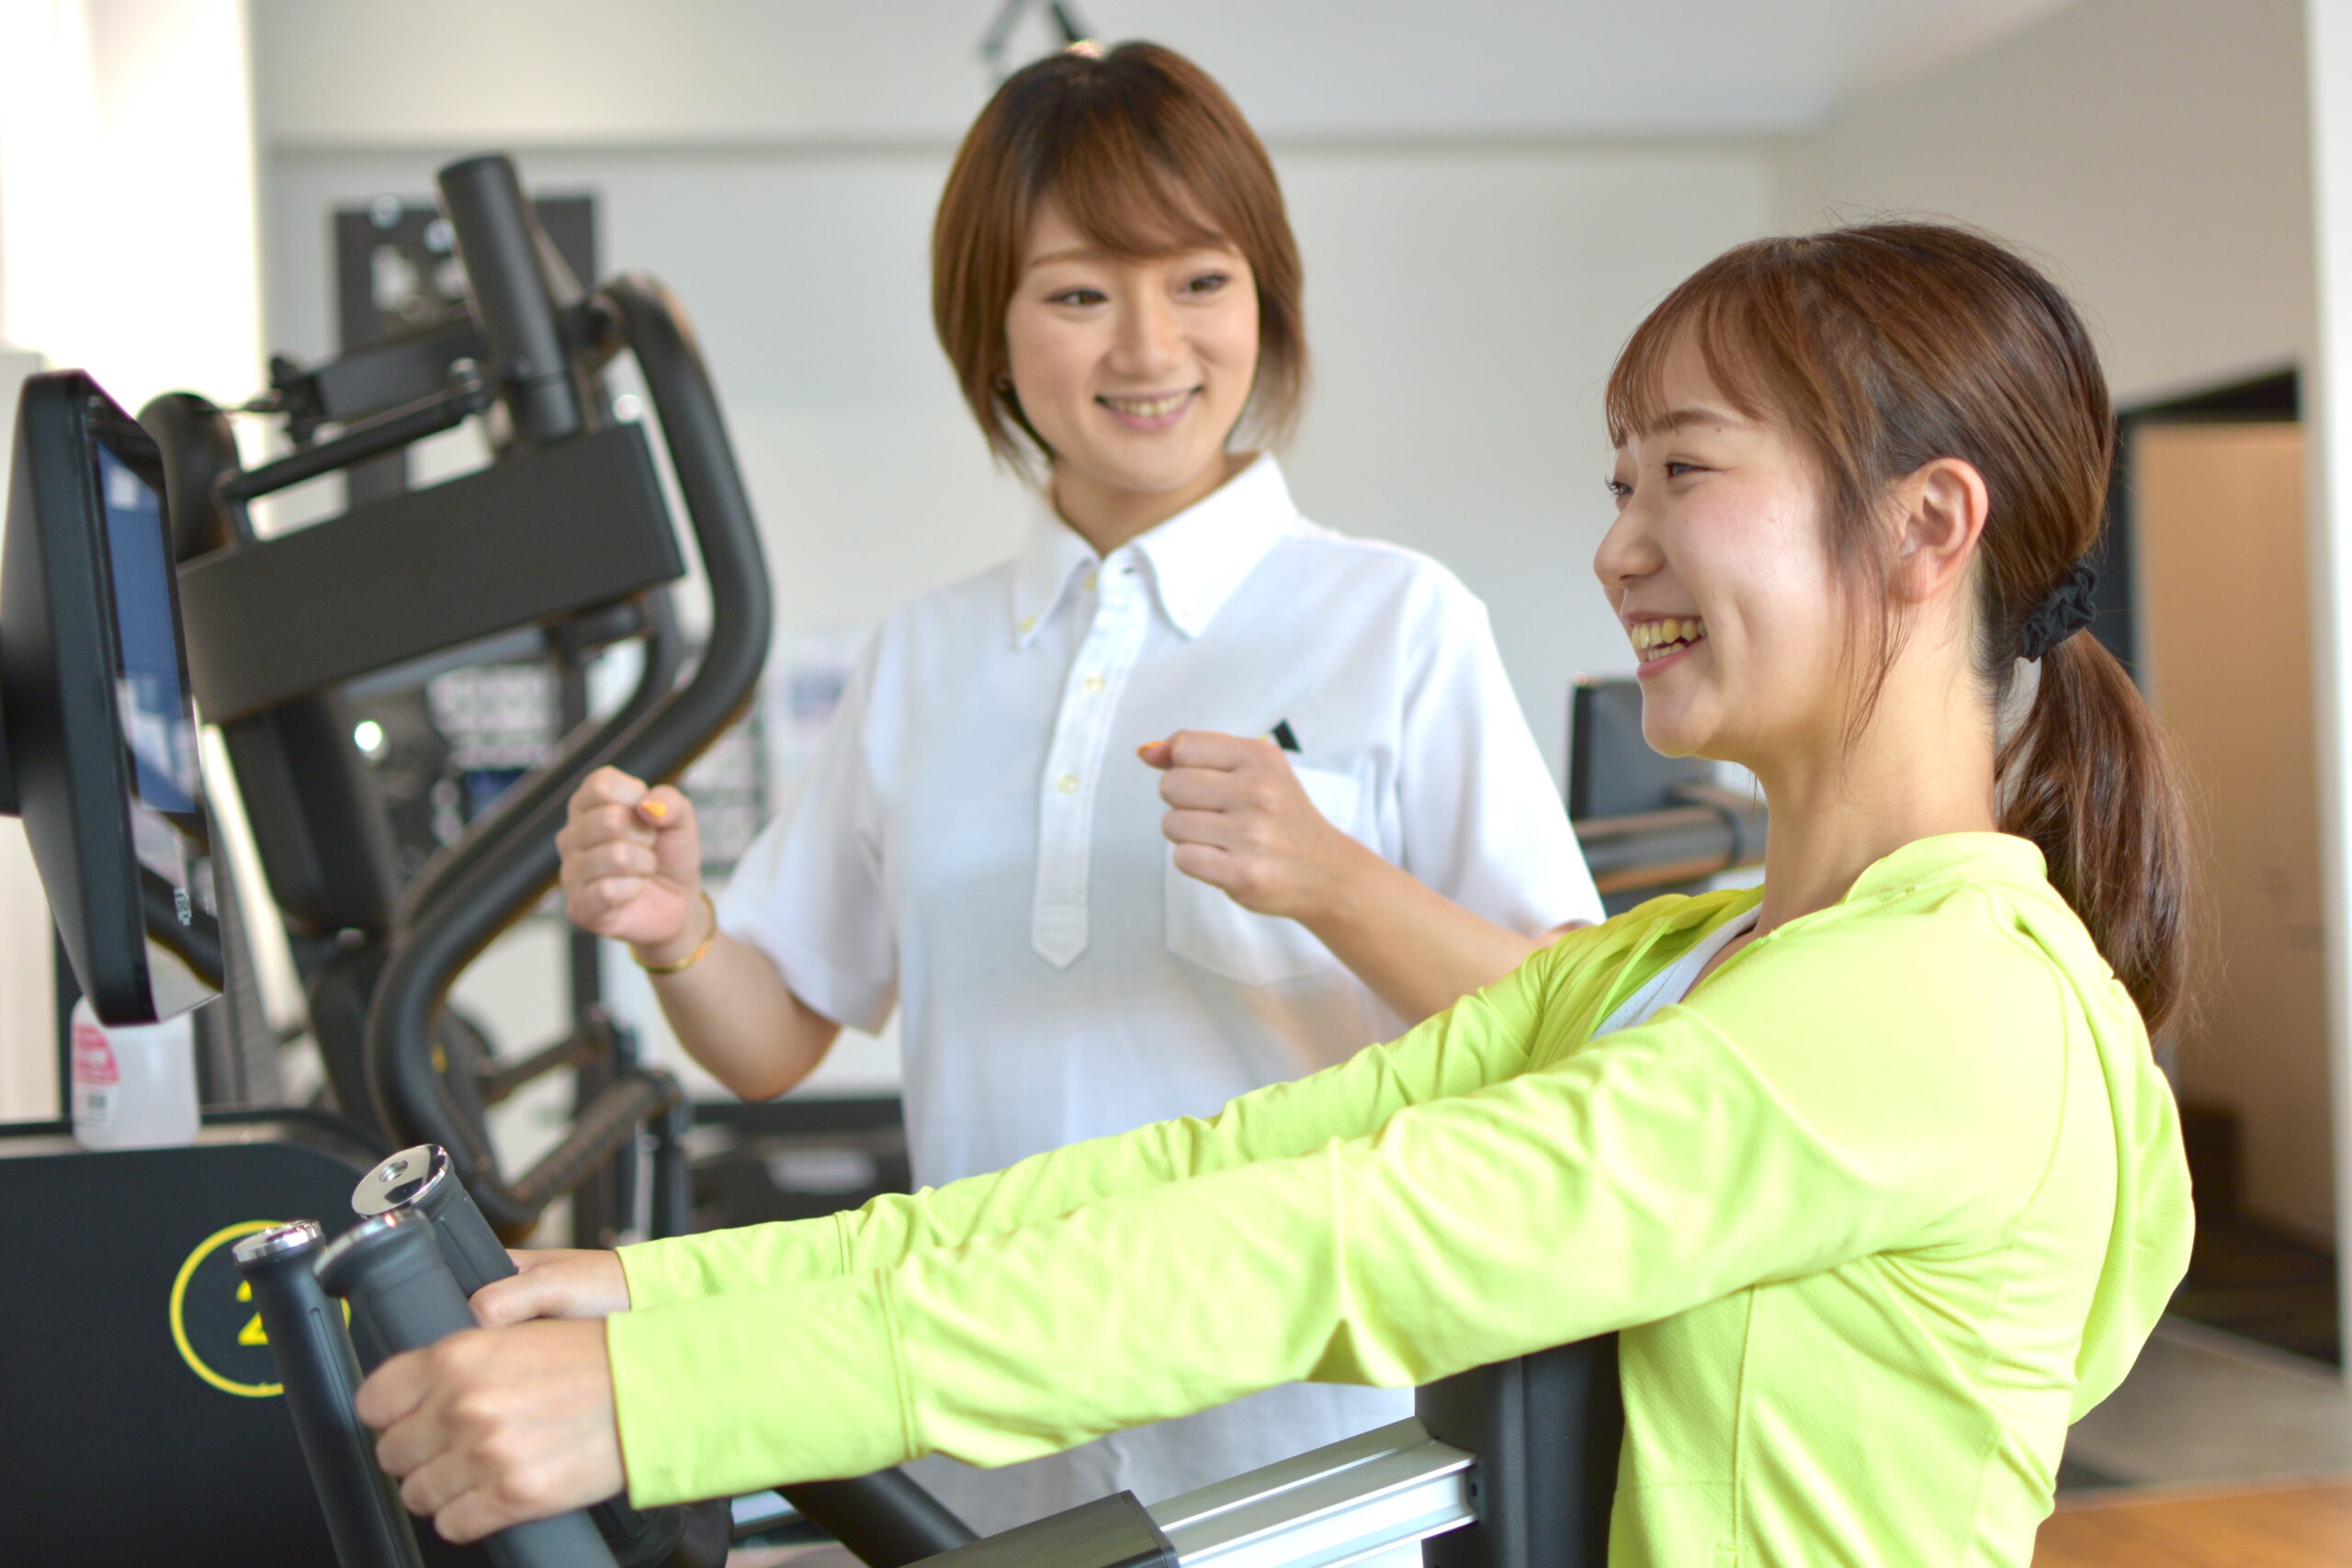 ACE1fitness2022年のお礼とご挨拶！！！page-visual ACE1fitness2022年のお礼とご挨拶！！！ビジュアル